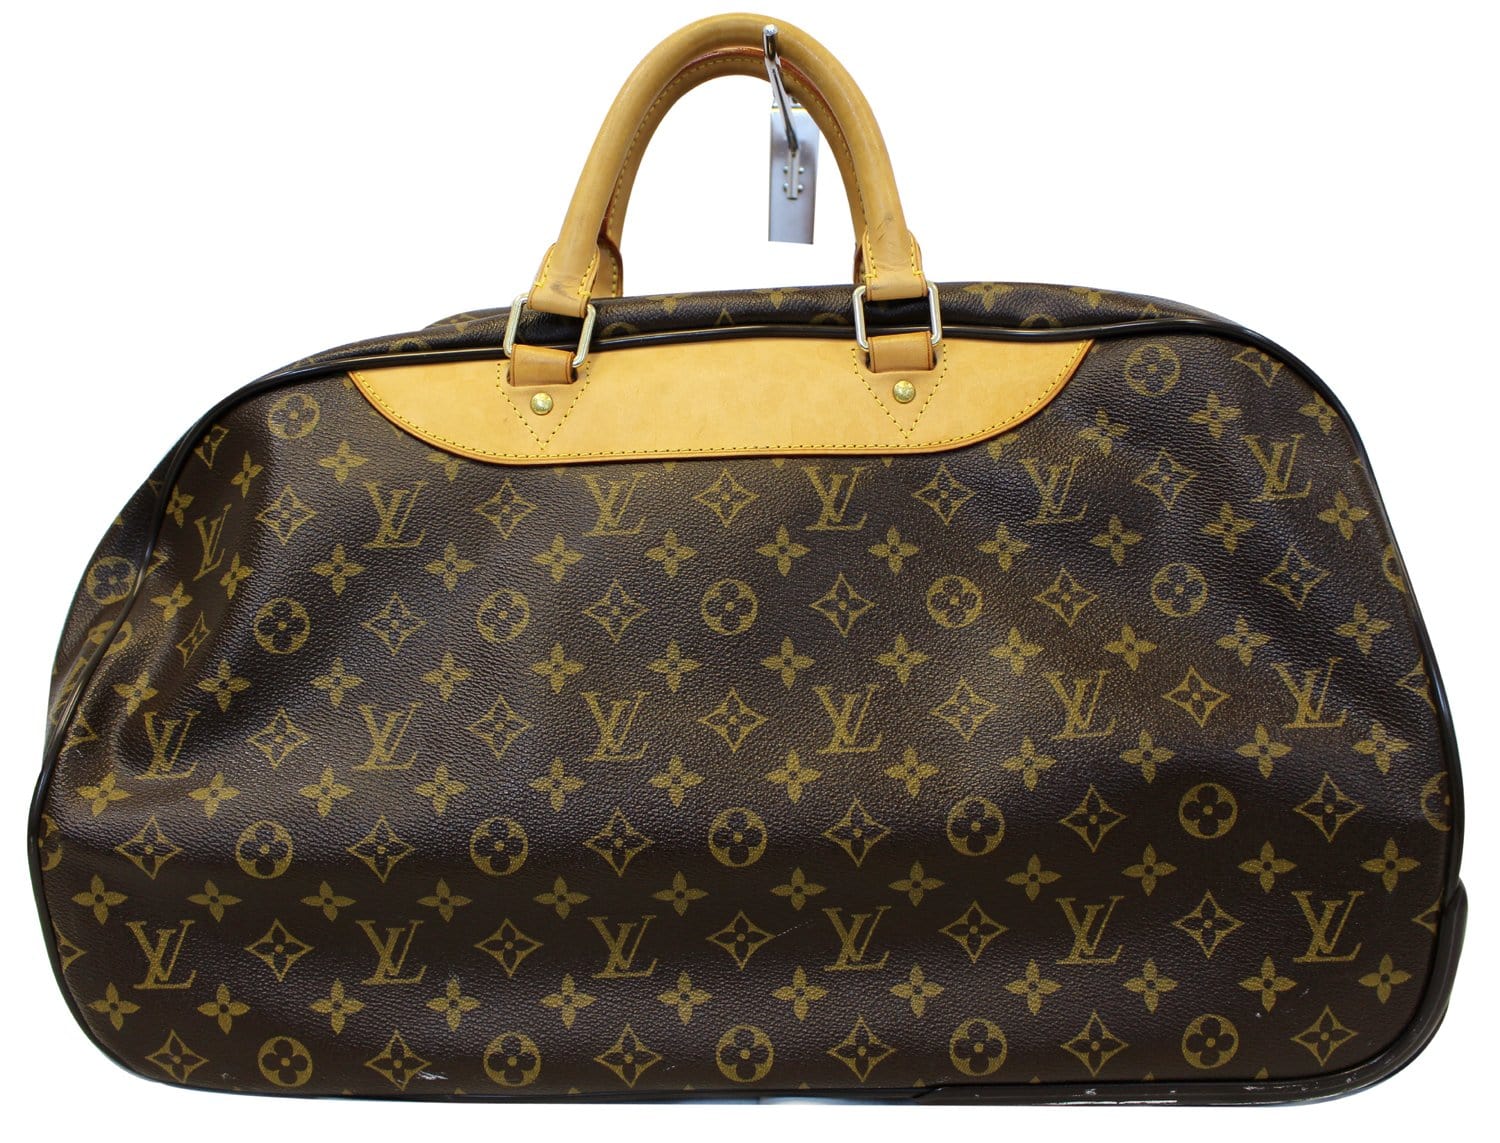 Louis Vuitton Eole 60 Rolling Luggage, $1,725